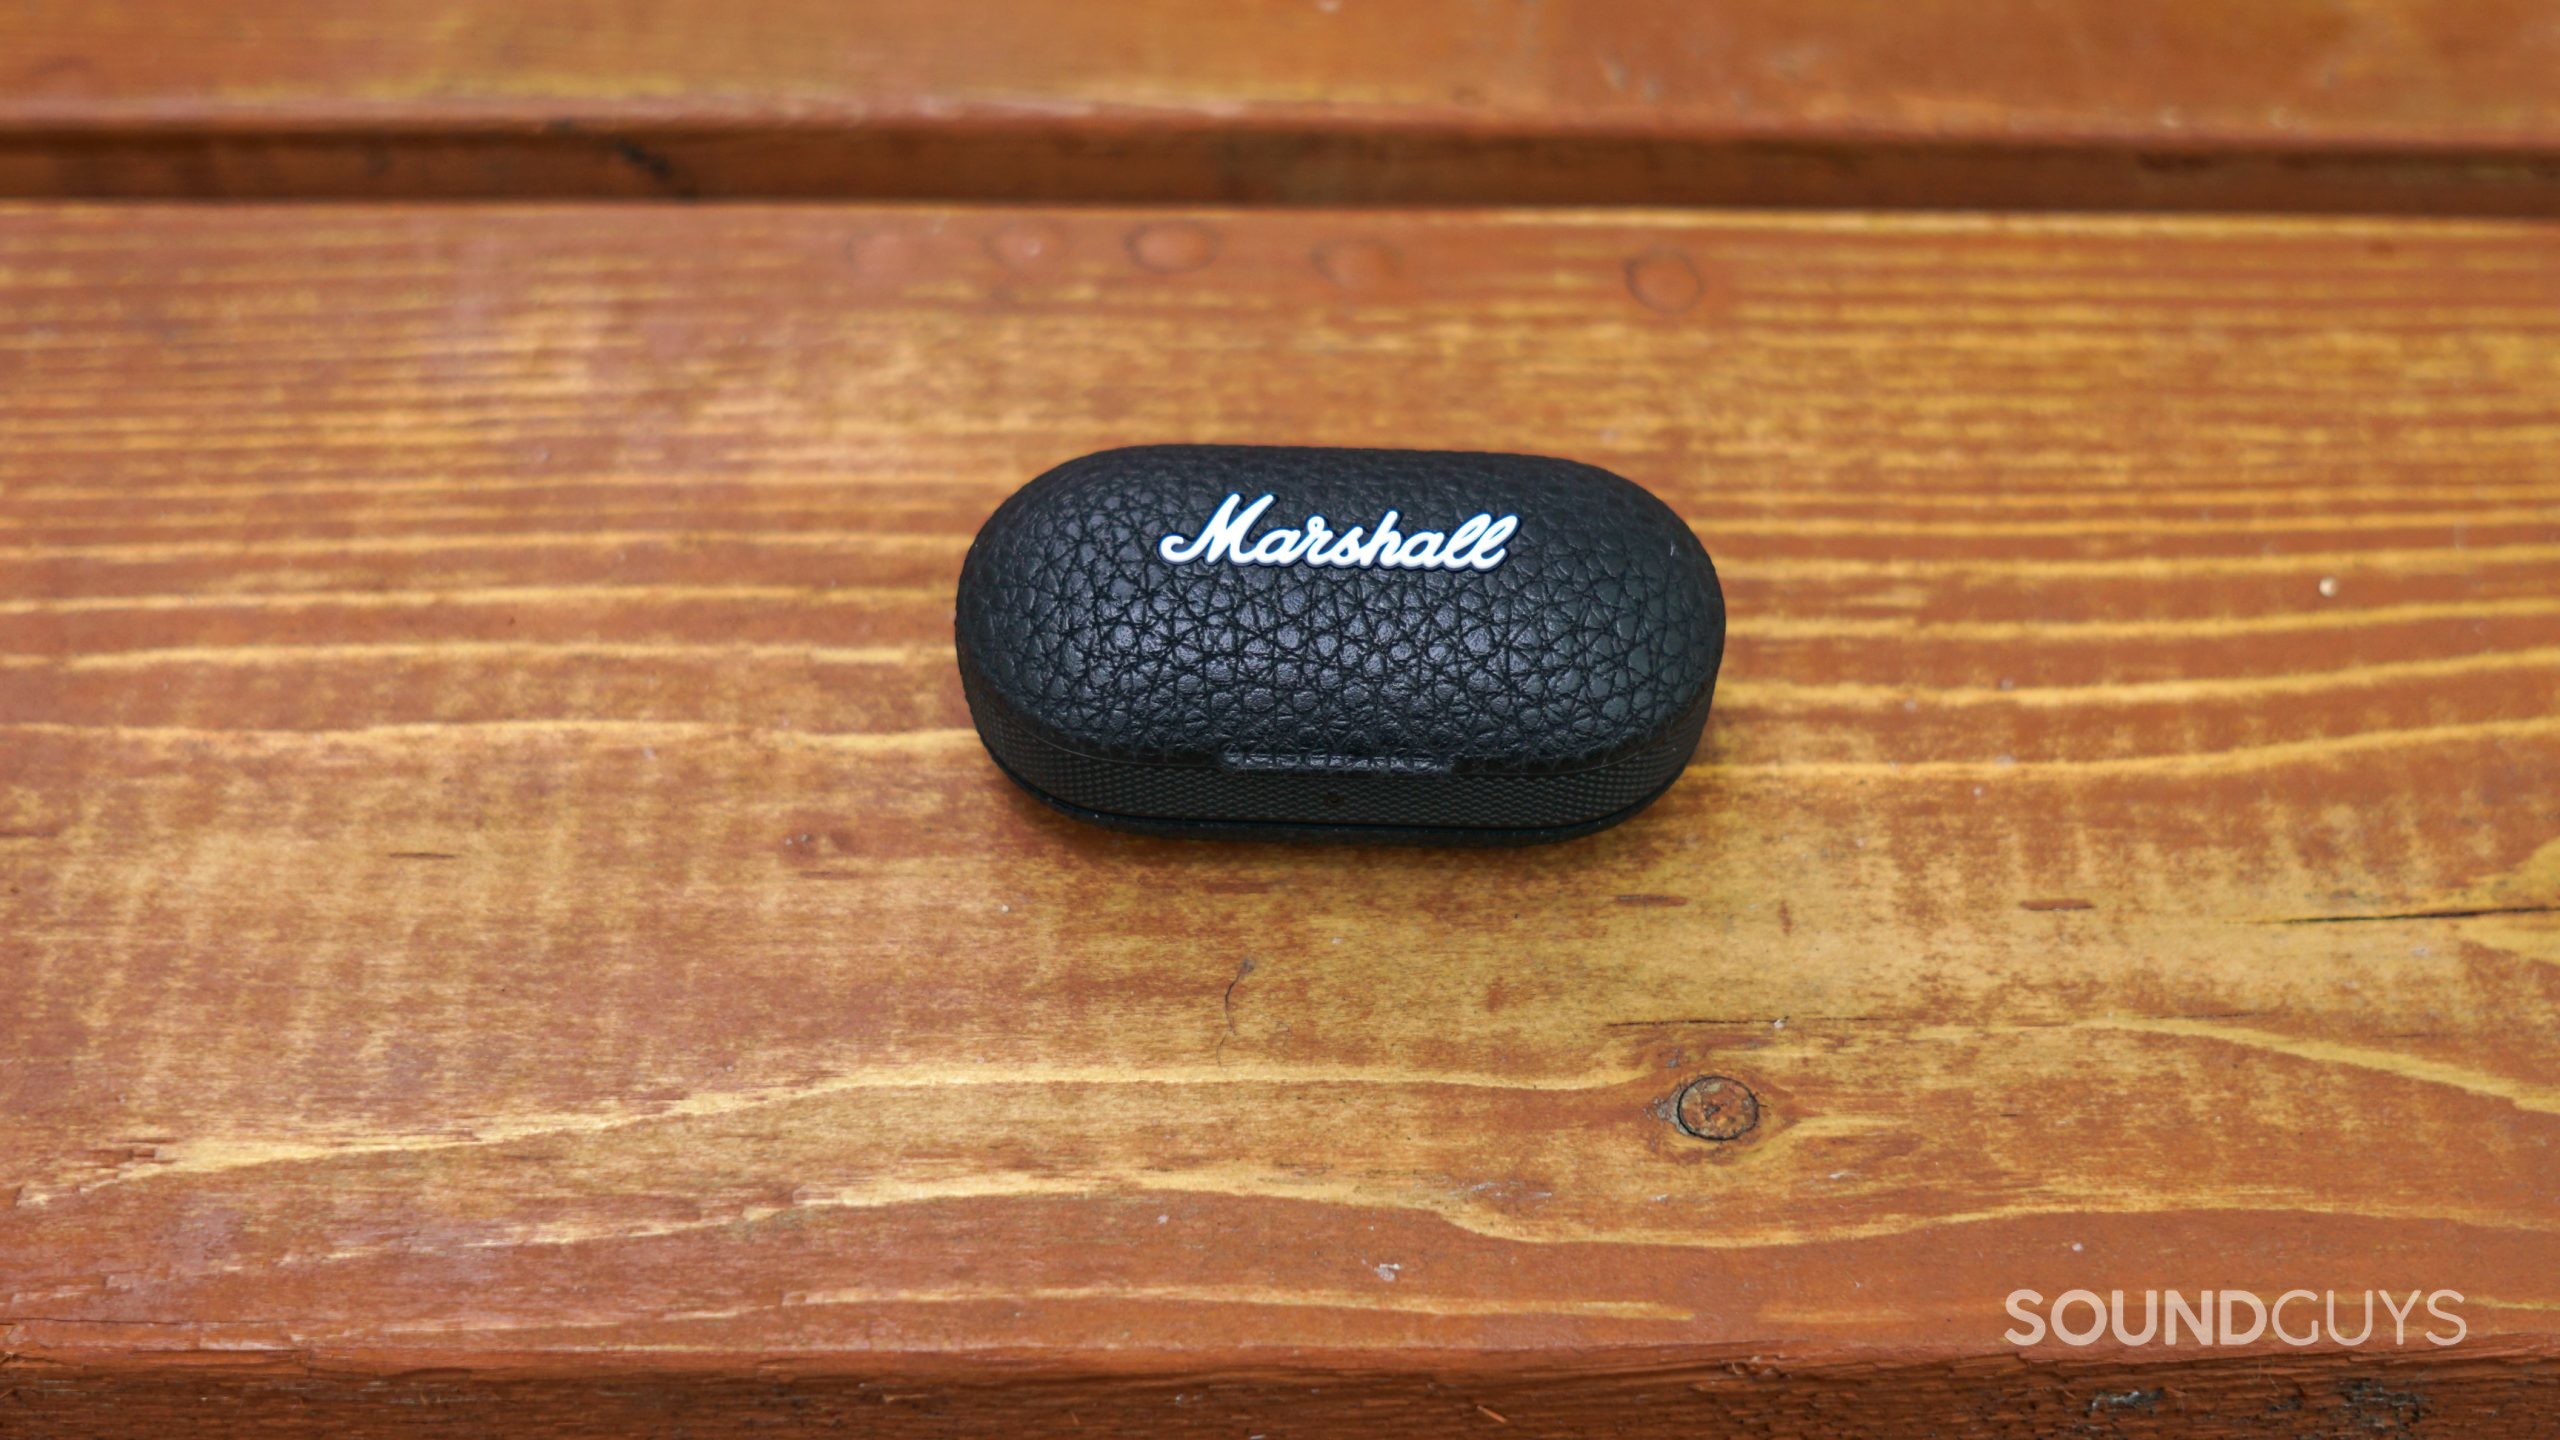 Auriculares Marshall Mode II (2) true wireless sonido premium unboxing test  y opinion 